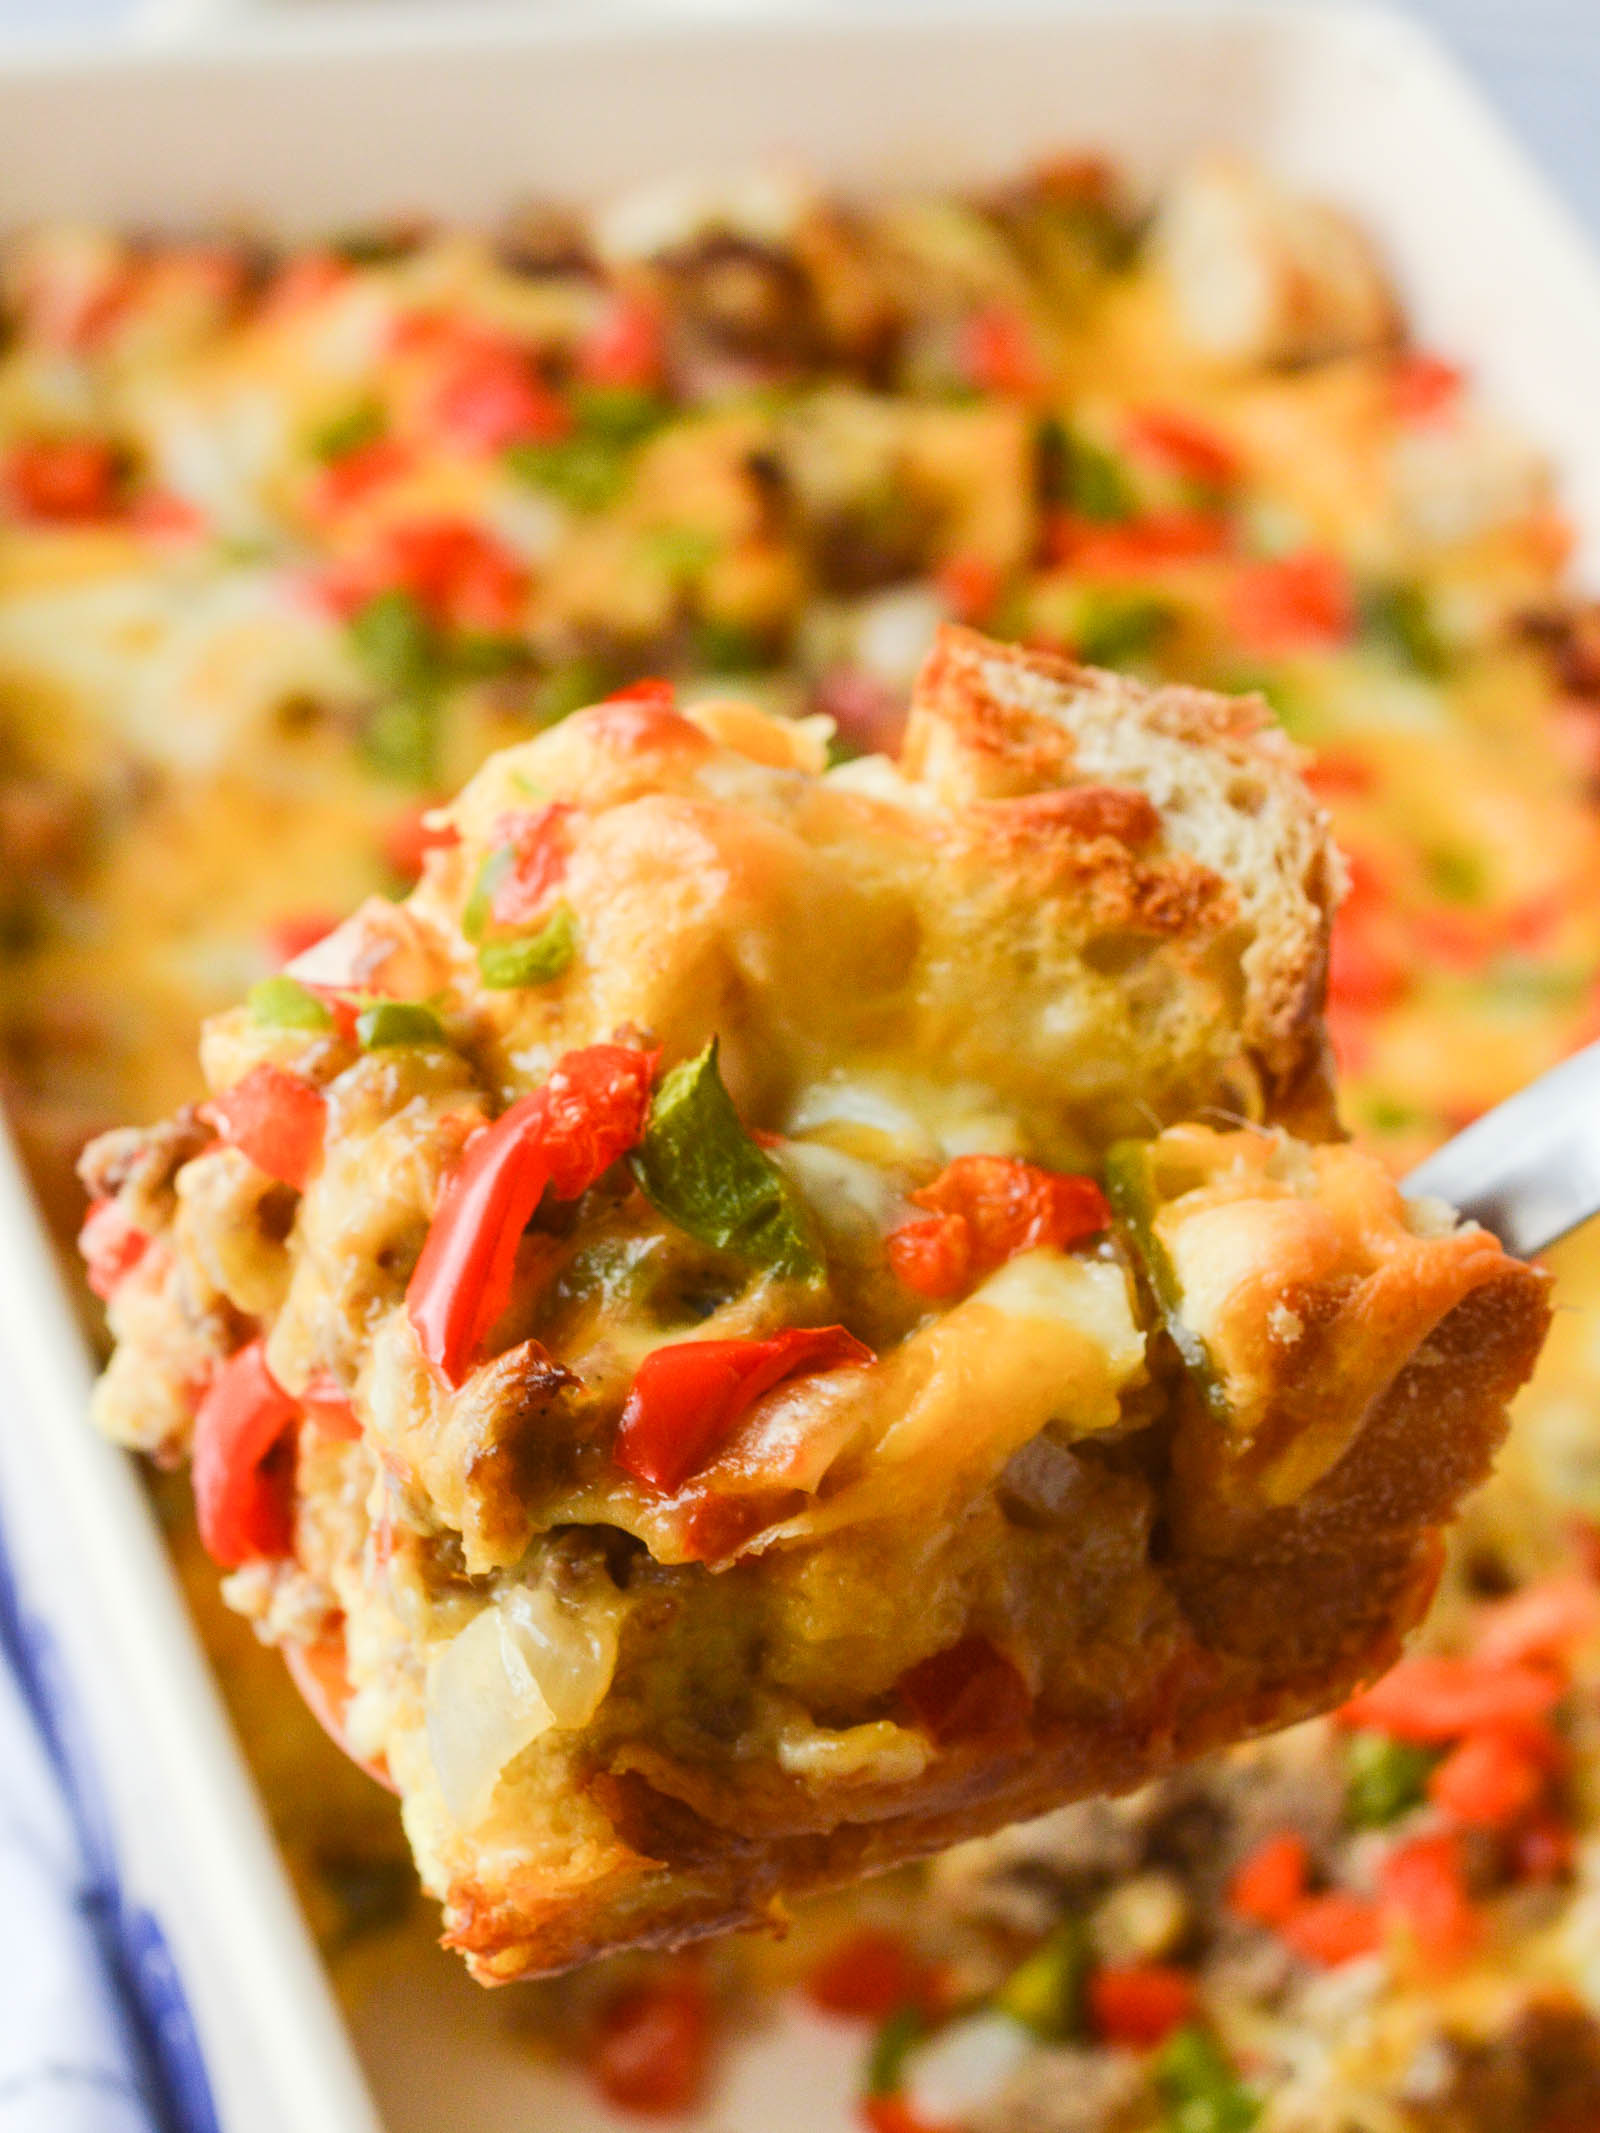 A hearty slice of Breakfast Strata with Sausage, dotted with red and green bell peppers and melted cheese. 